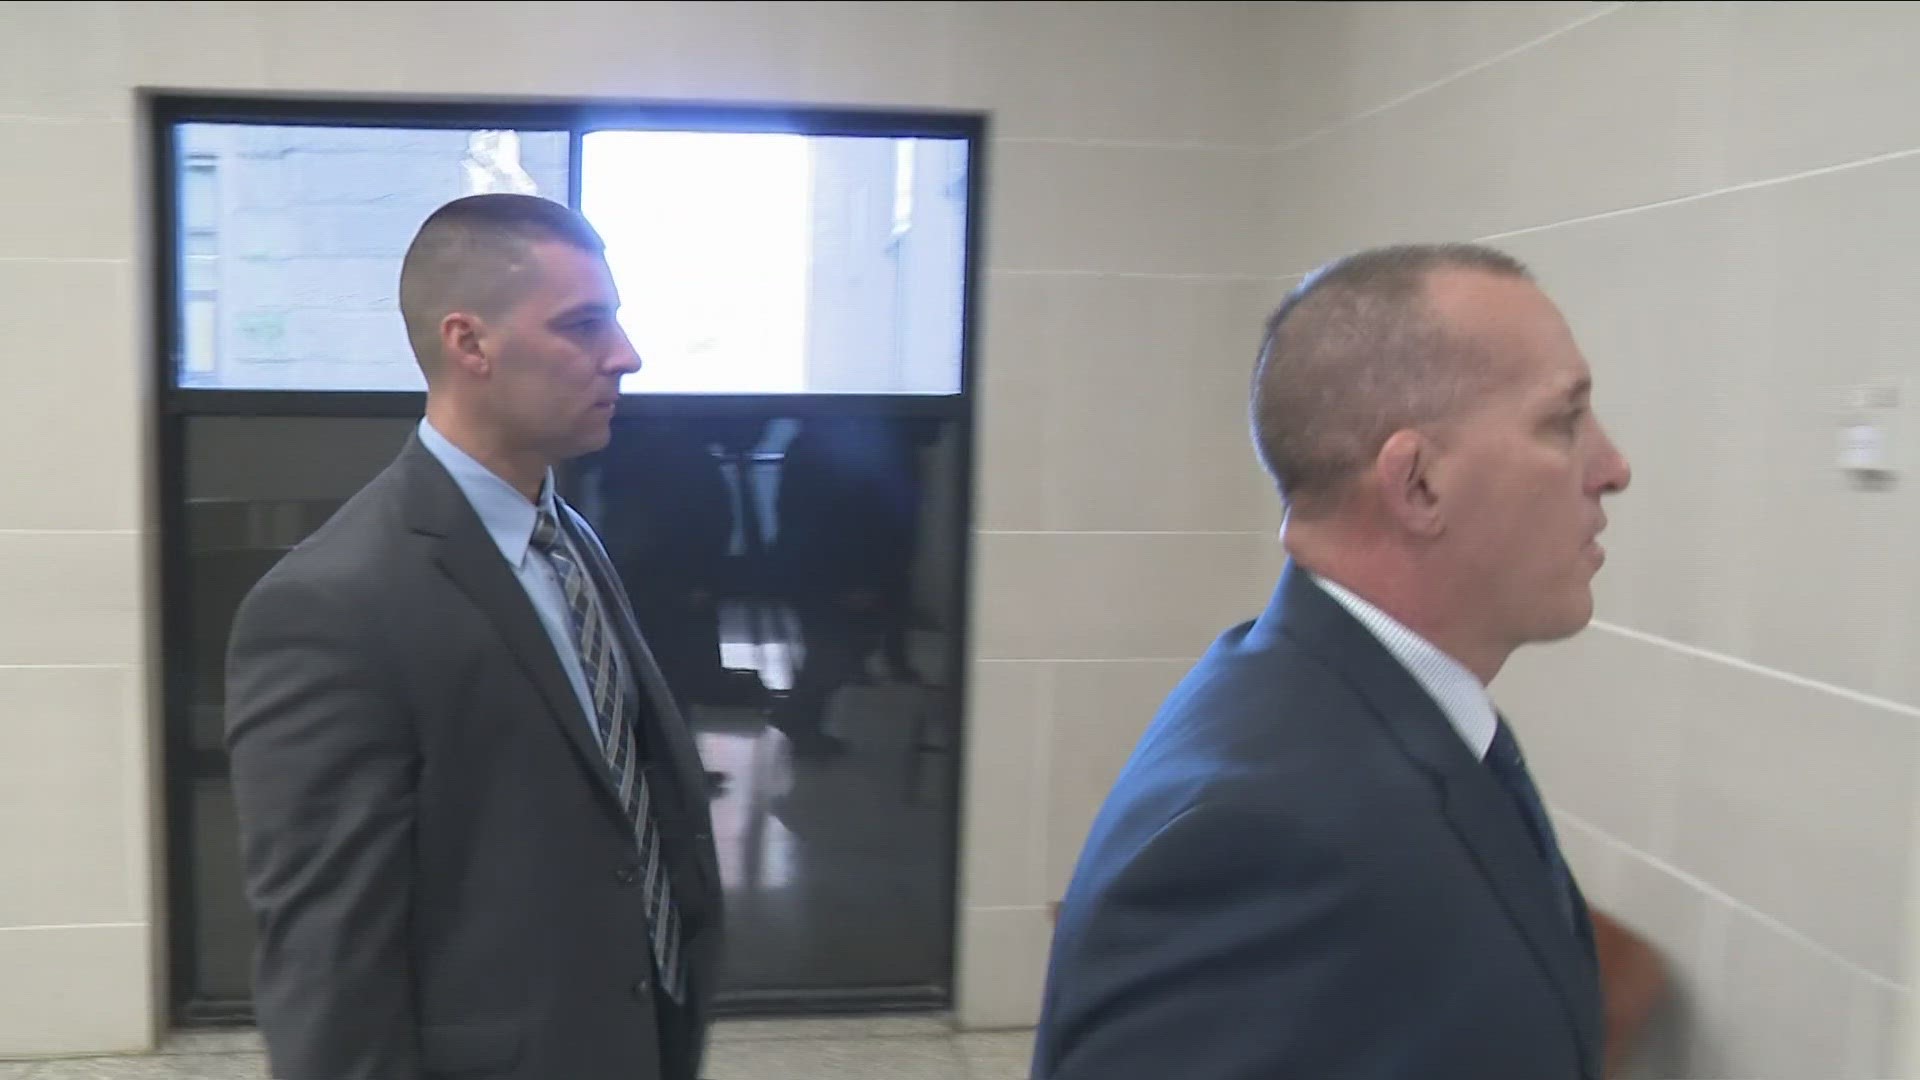 The prosecution probed during the trial Friday, whether Trooper Nigro actions followed state guidelines.